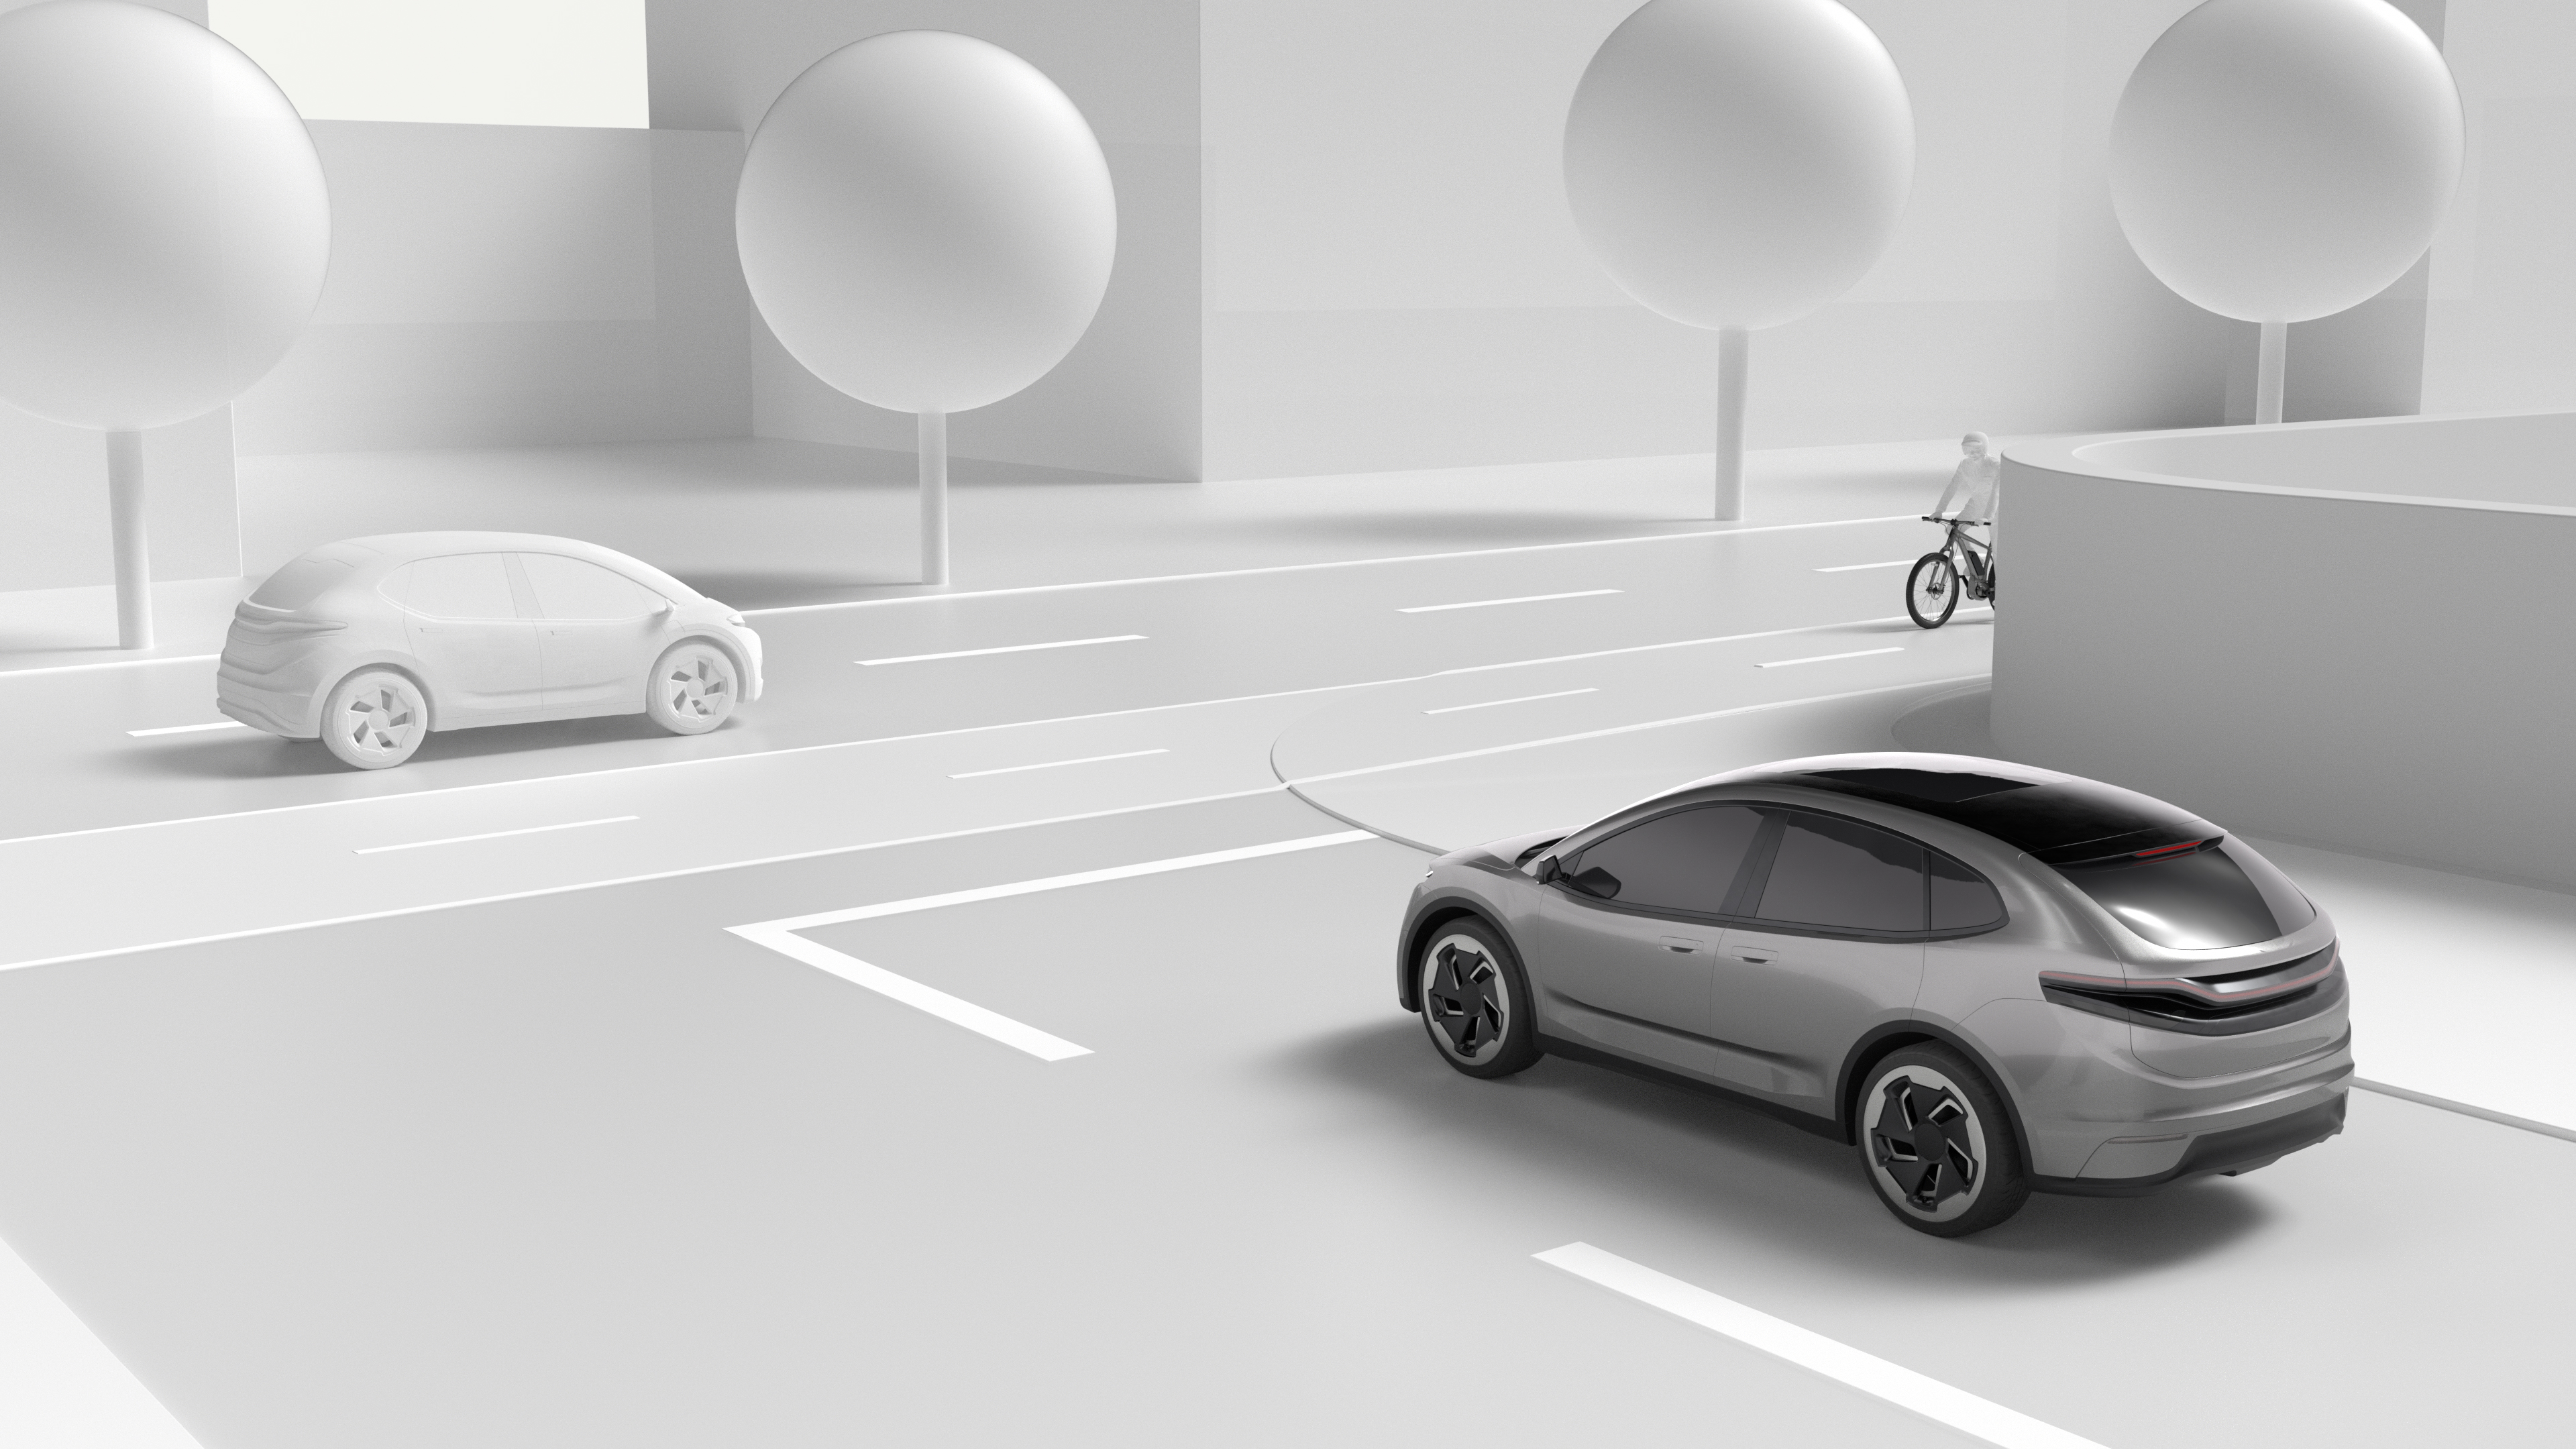 Auto, cycling and tech innovators launch Coalition for Cyclist Safety based on V2X deployments